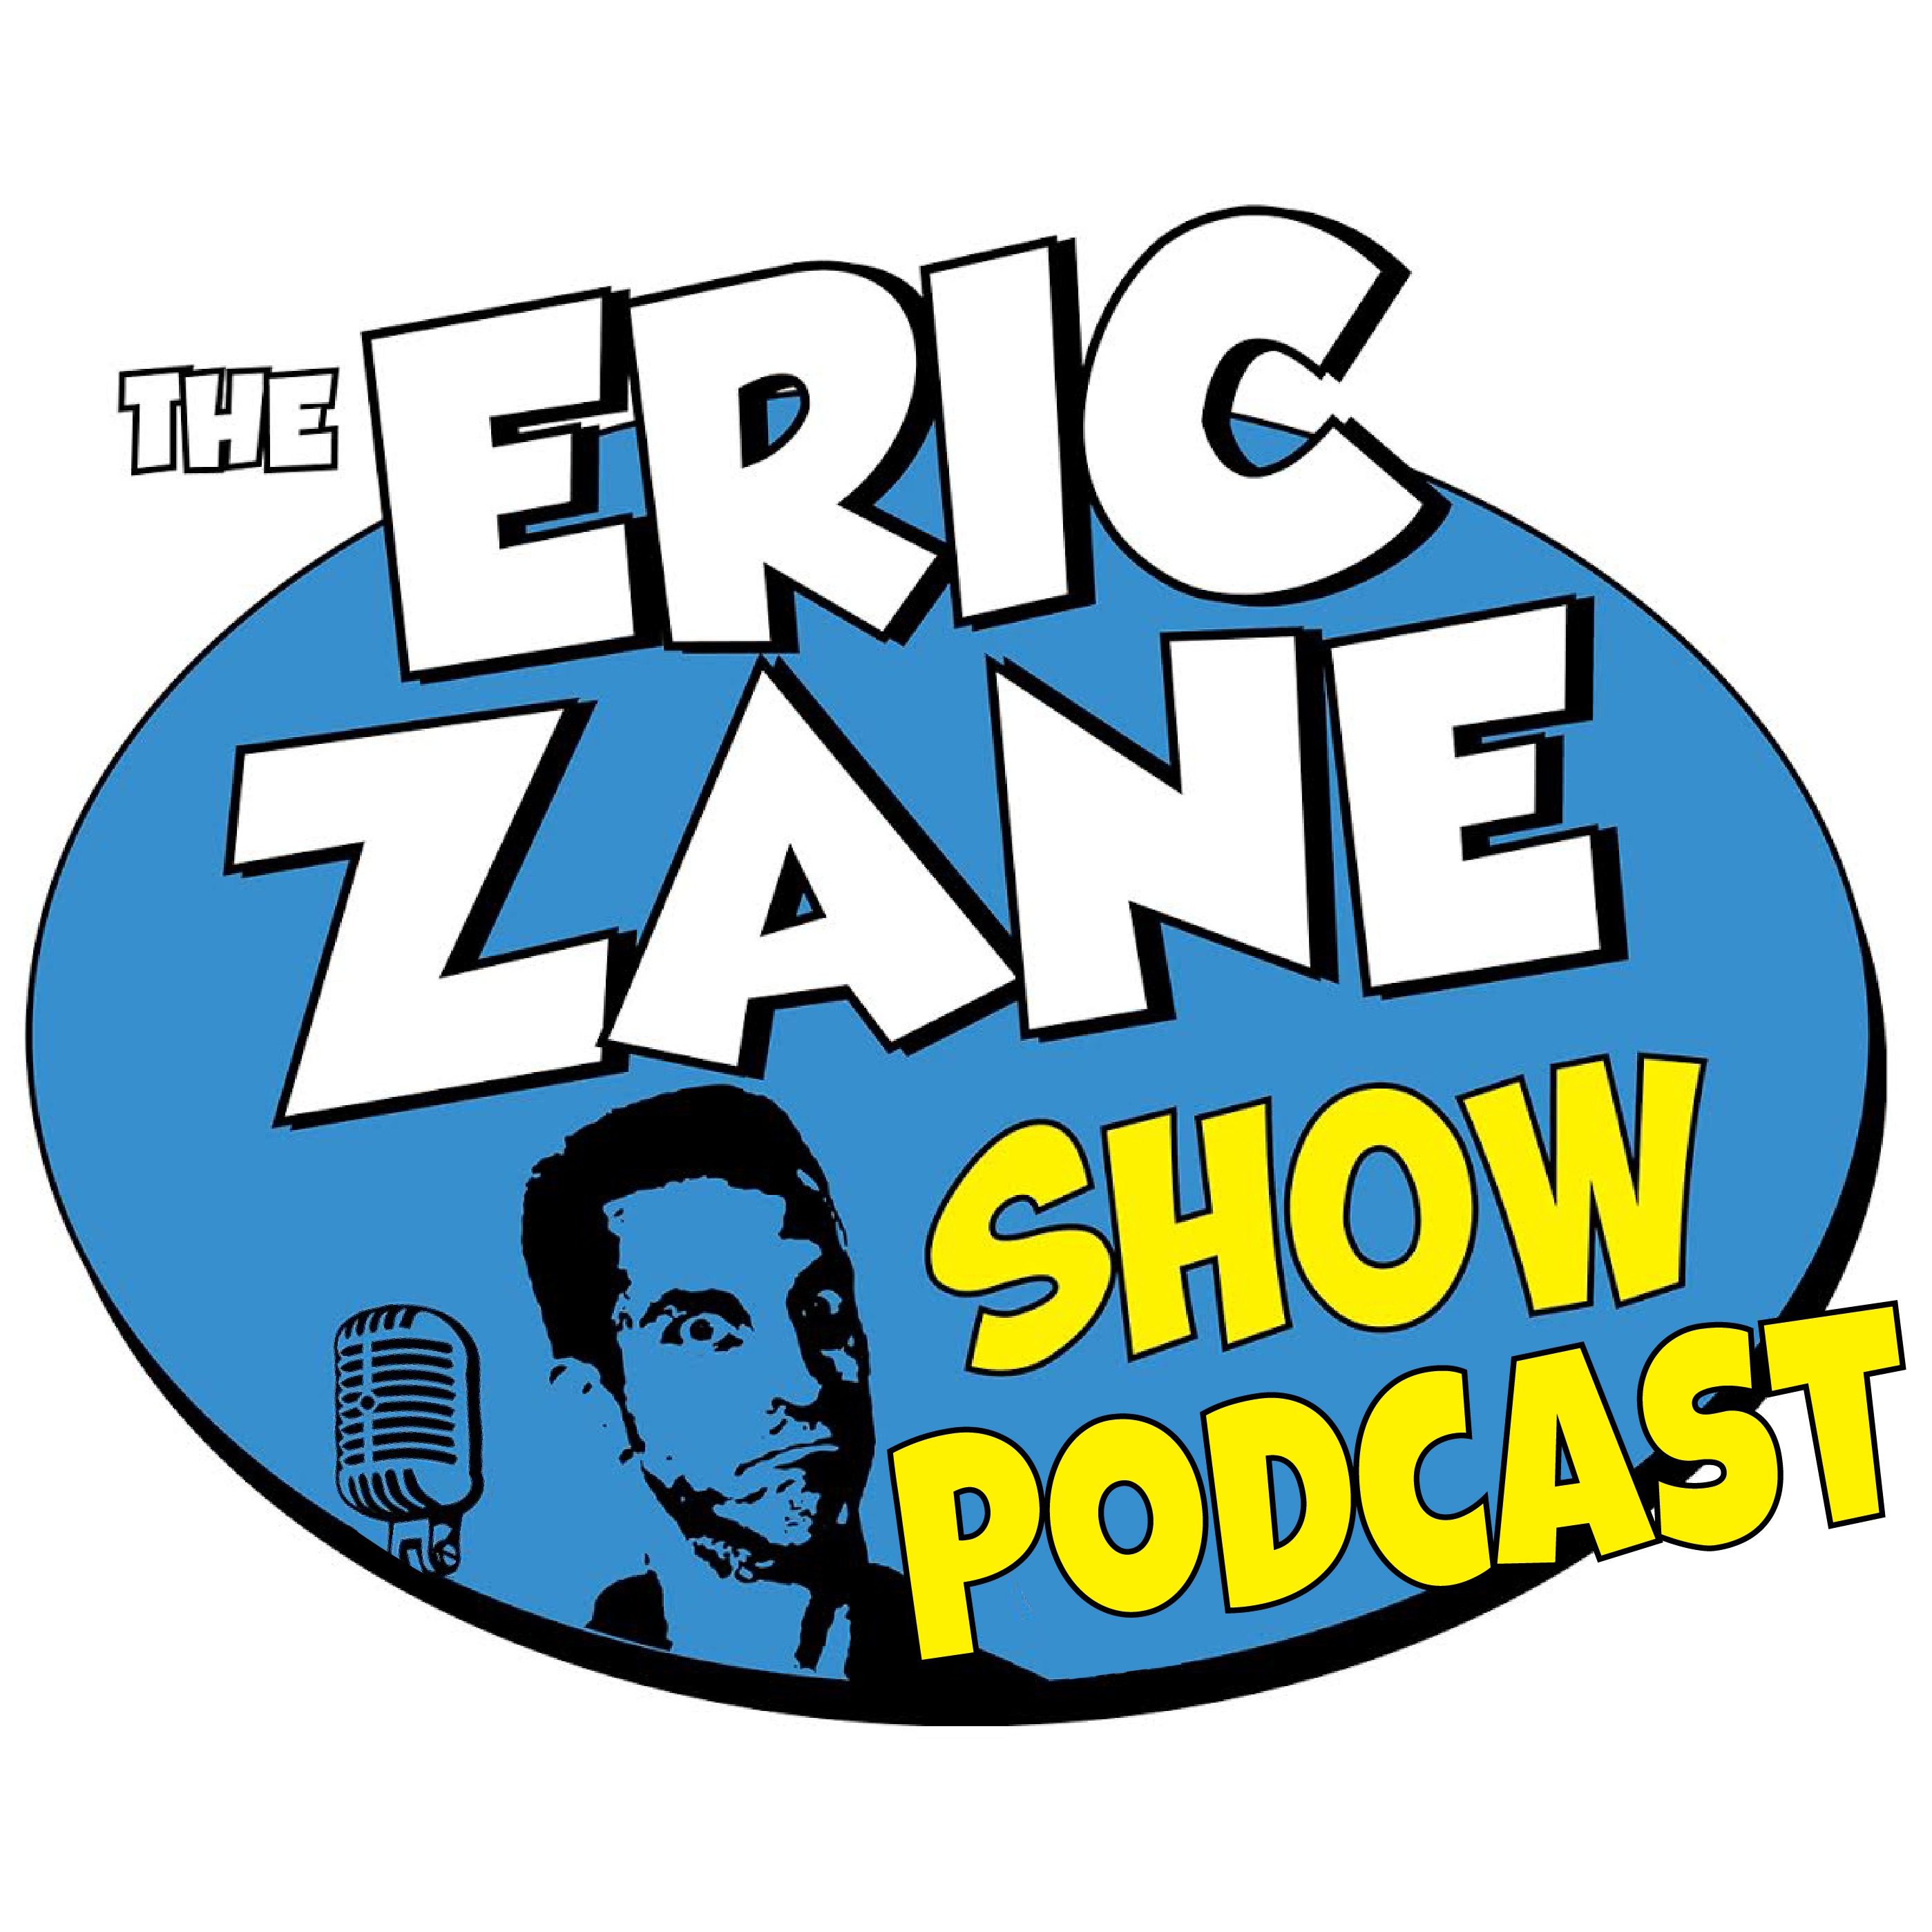 Eric Zane Show Podcast Ep 921 What kind of slime?